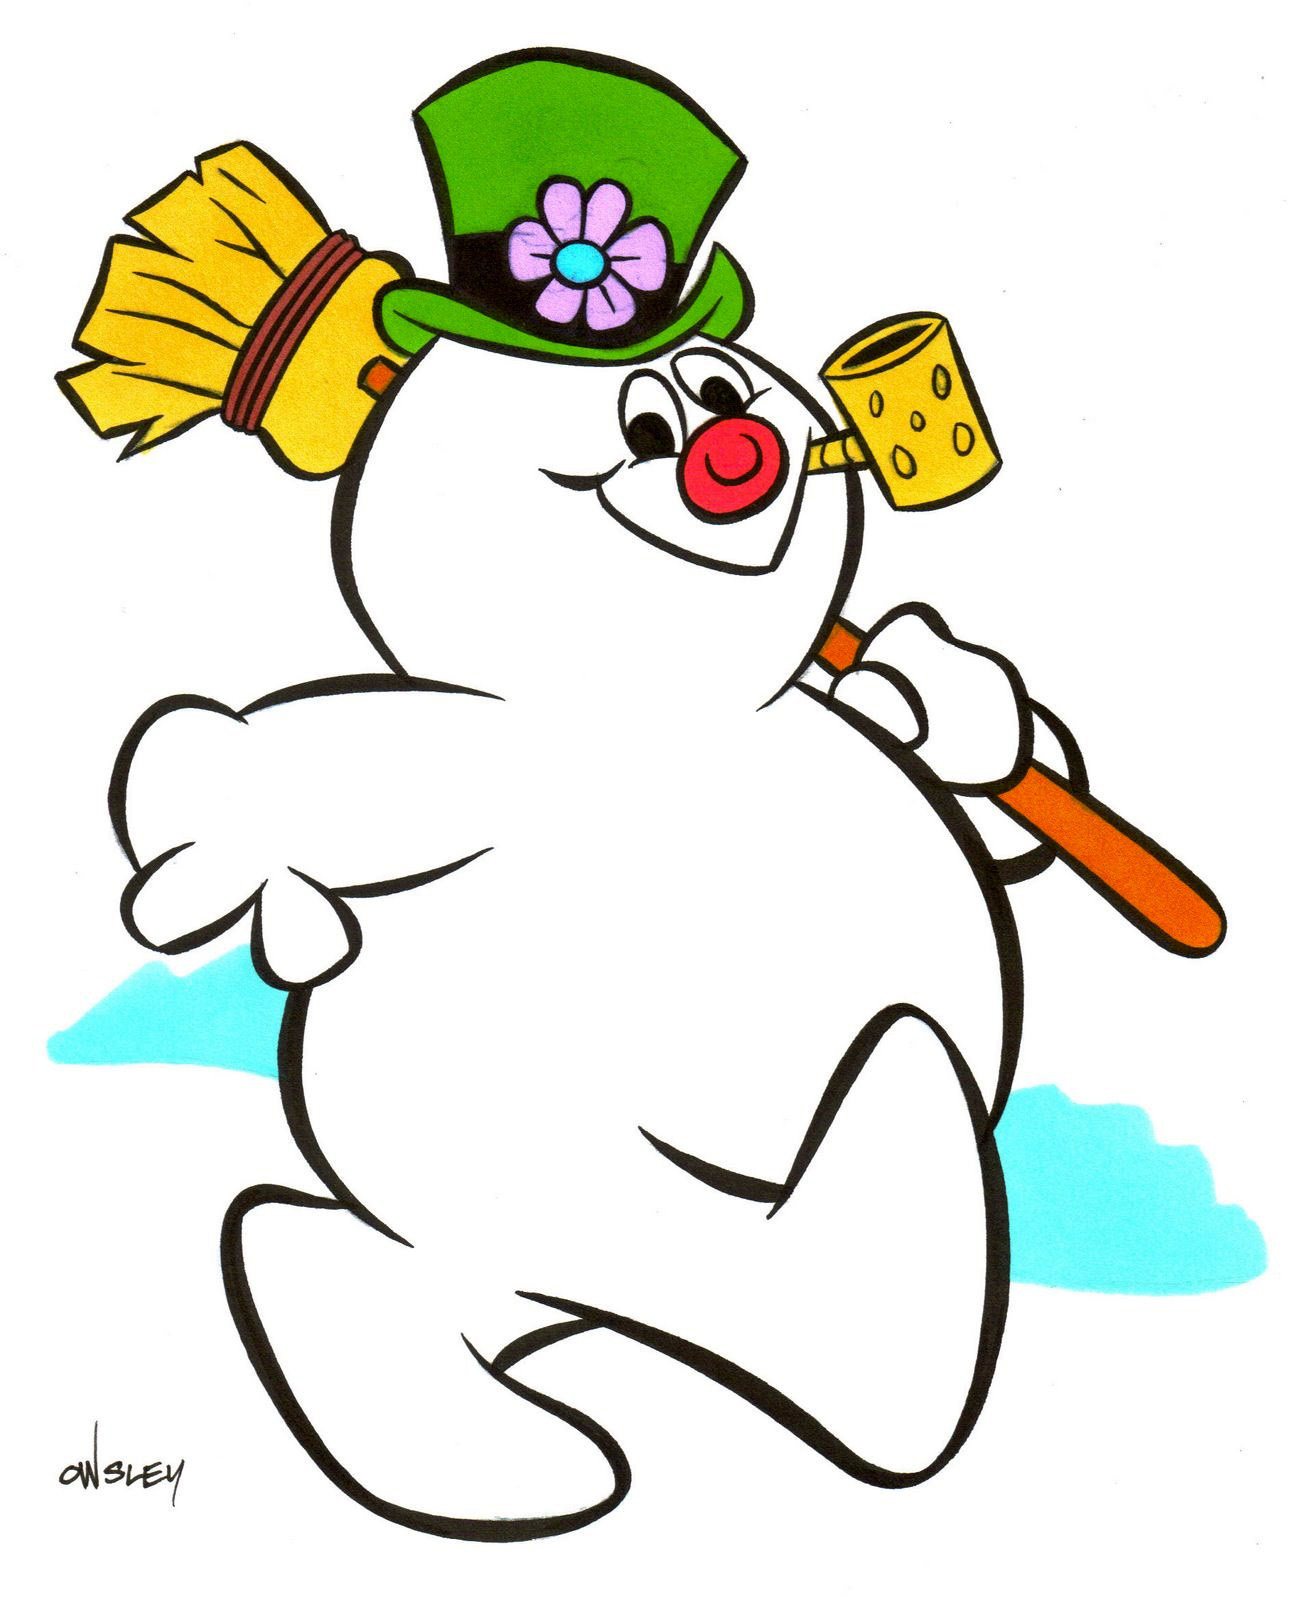 Frosty The Snowman Wallpapers Movie Hq Frosty The Snowman Pictures 4k Wallpapers 2019